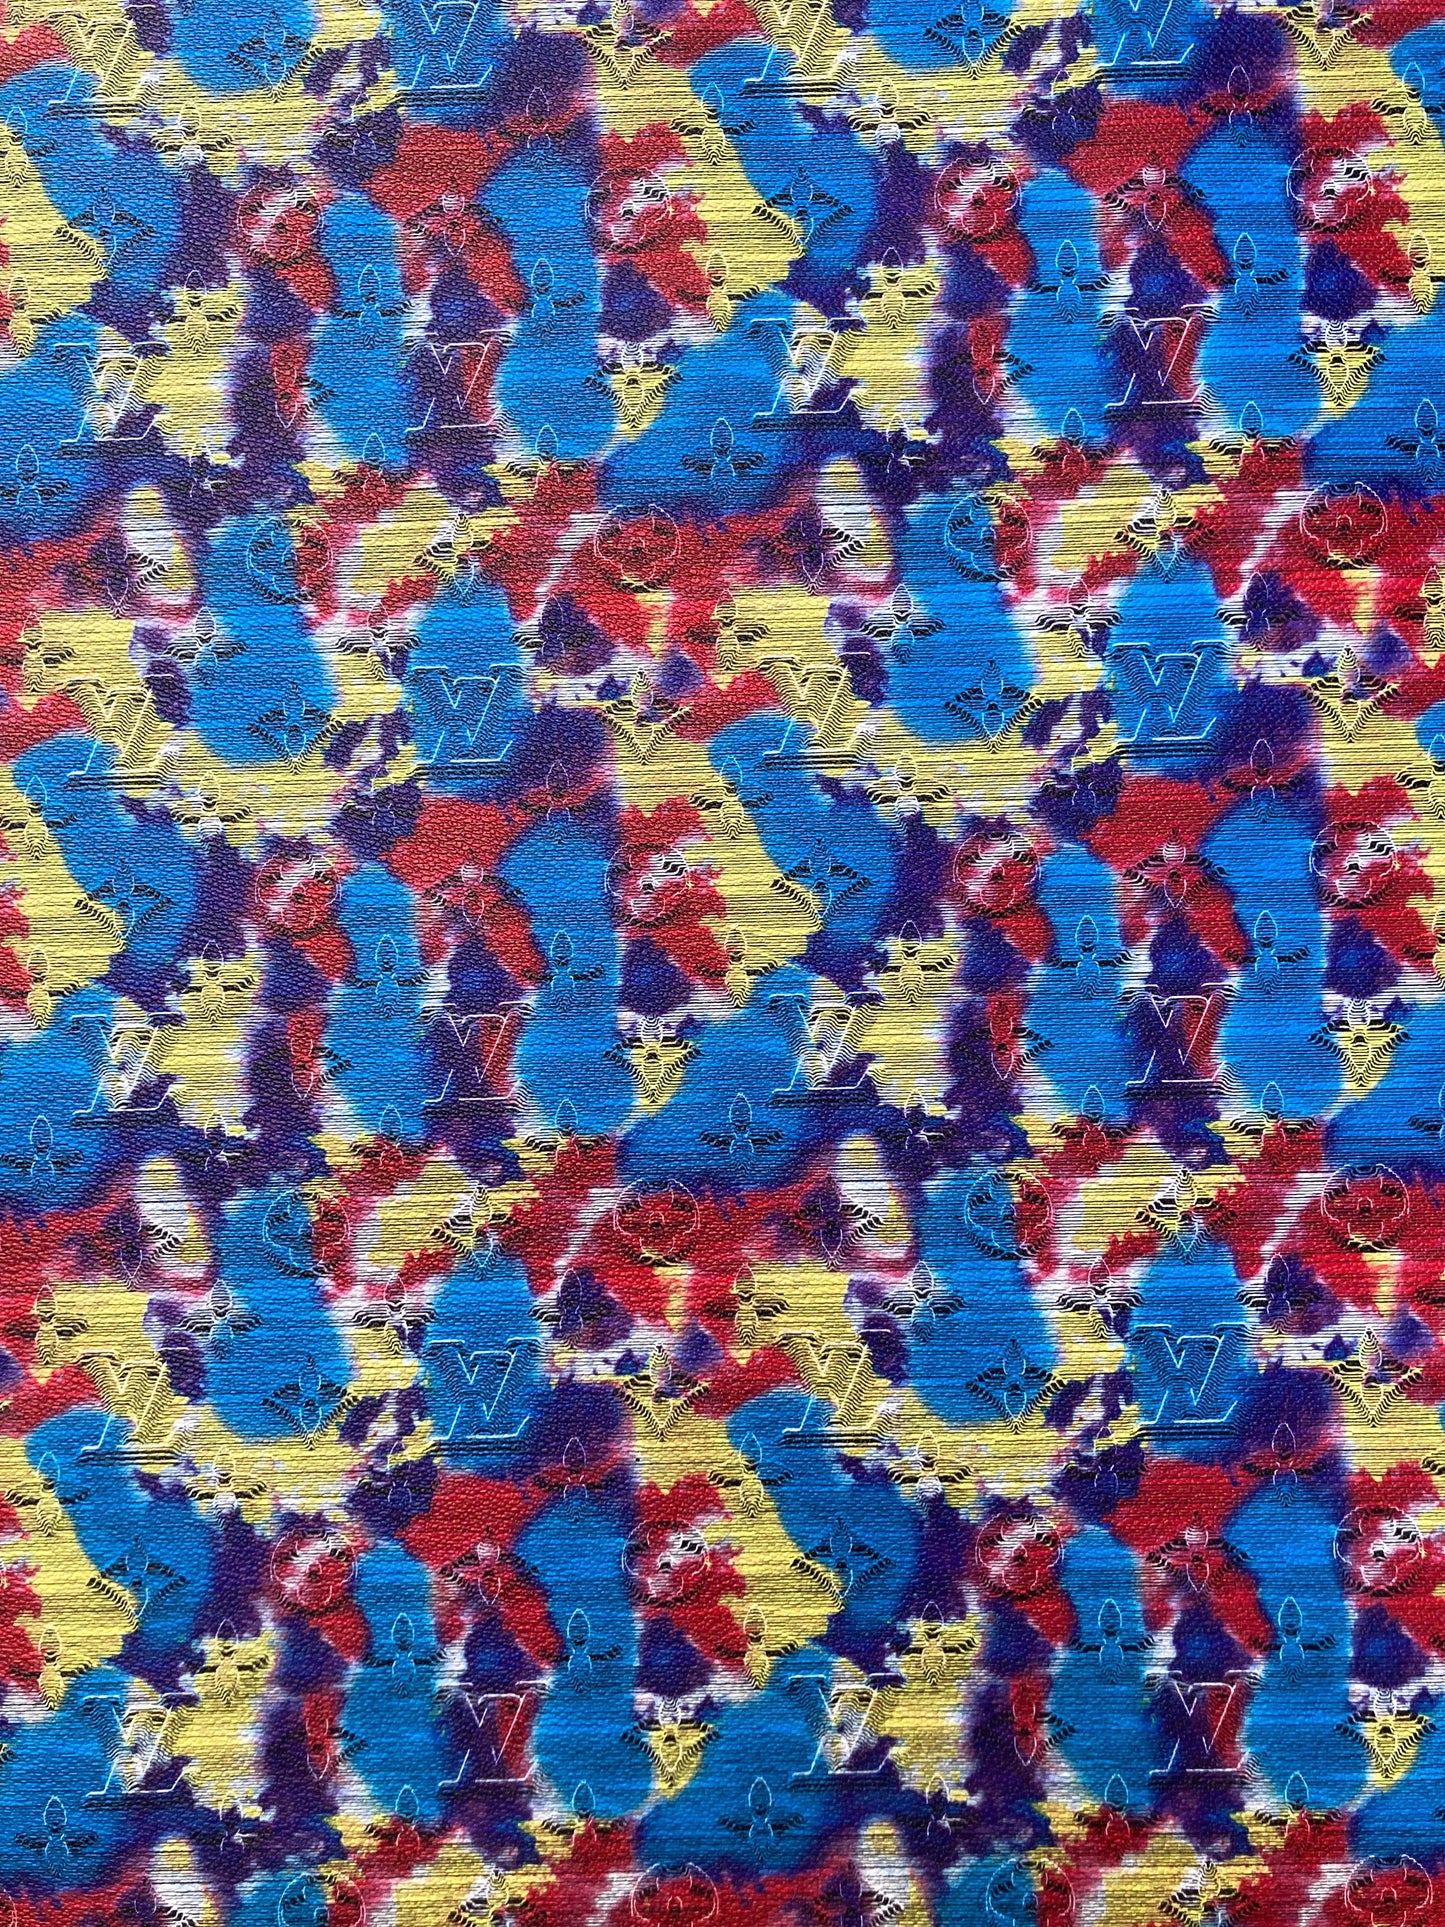 Custom Crafts Camouflage LV Leather Fabric for Handmade Upholstery